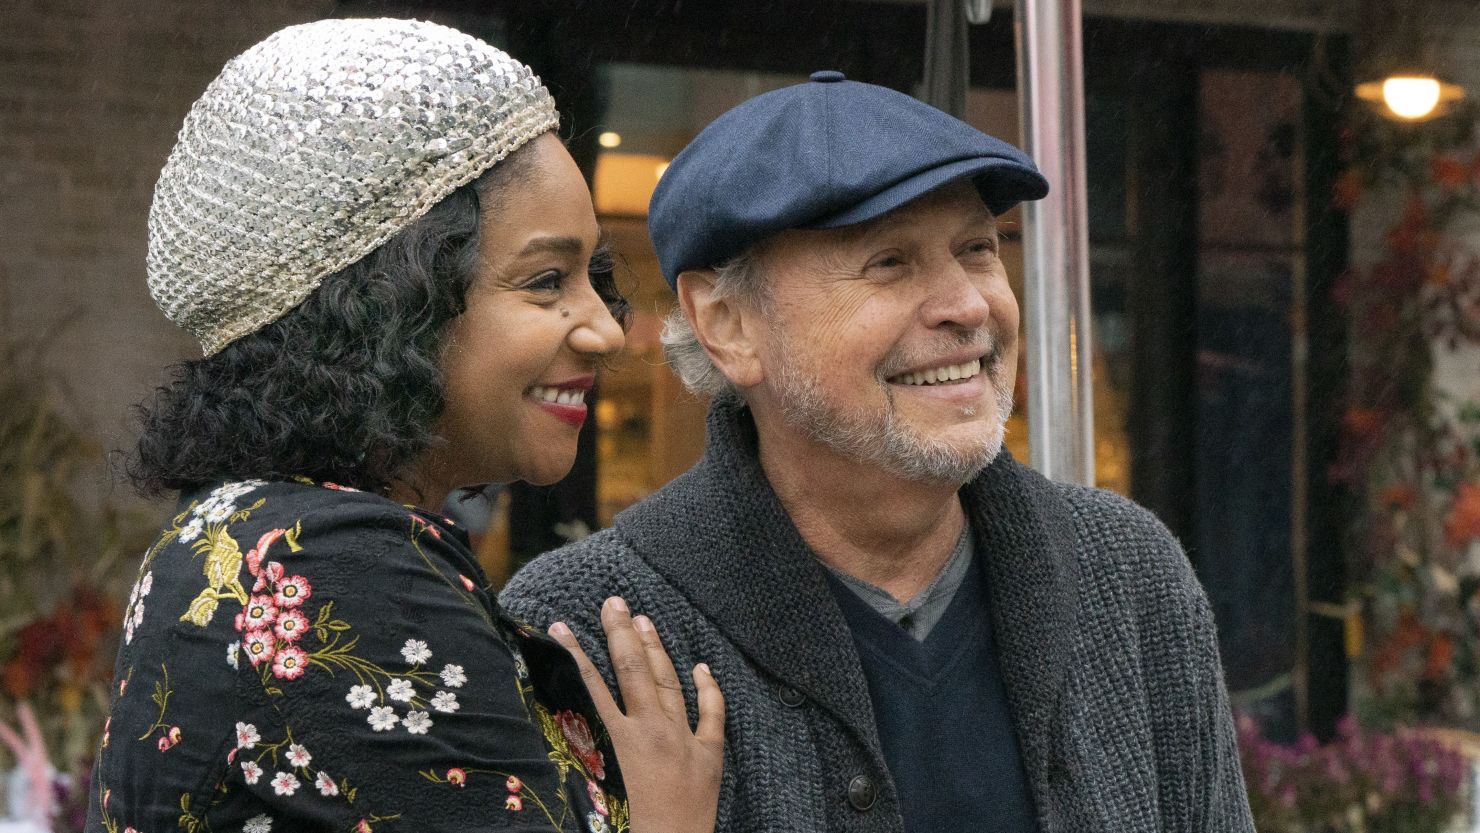 Tiffany Haddish and Billy Crystal strike up an unlikely friendship in "Here Today."